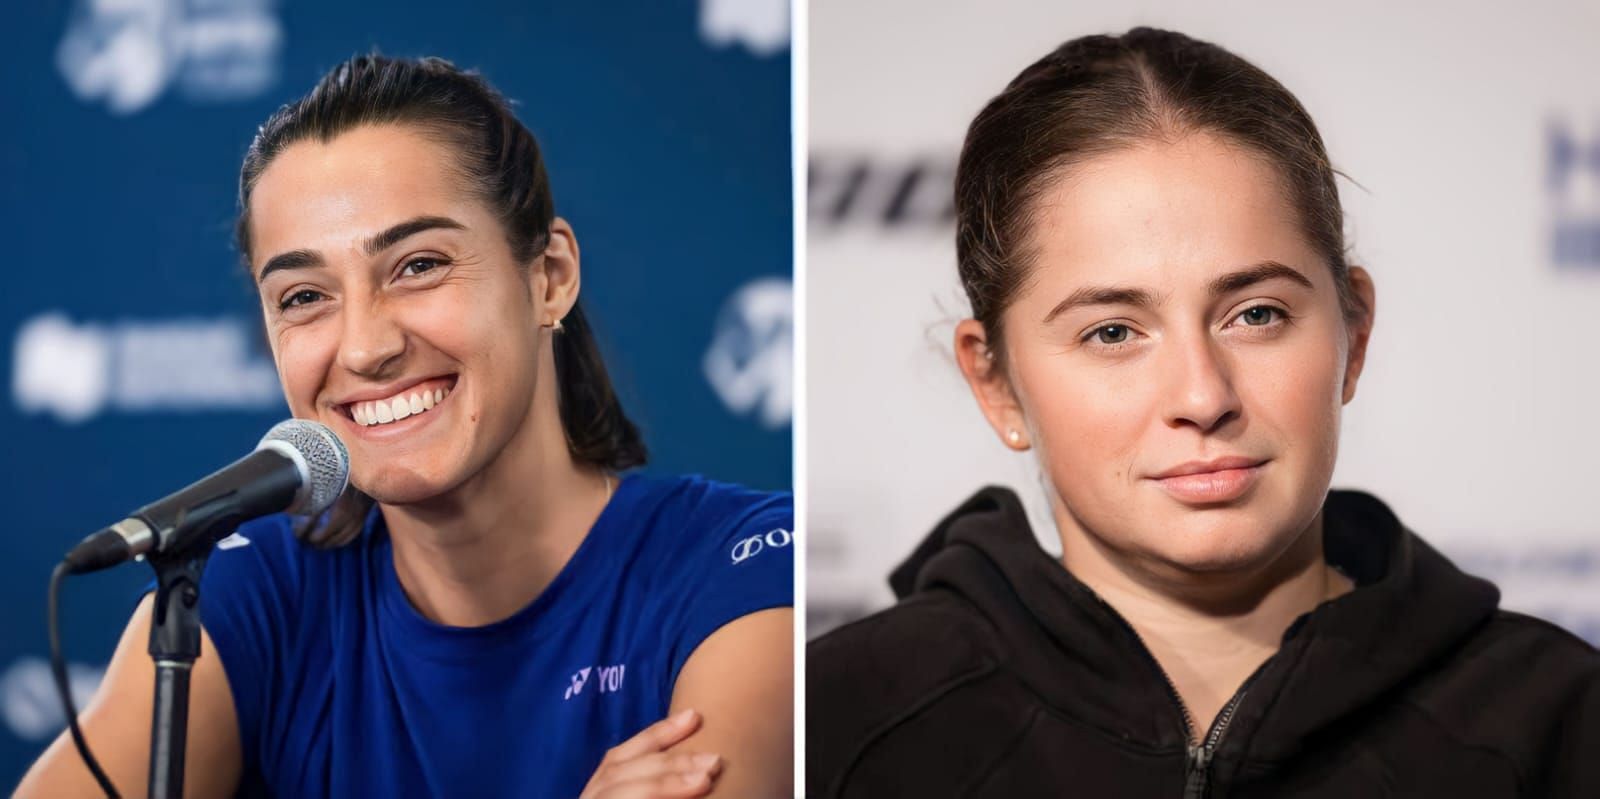 Garcia stunned by the stats from loss against Ostapenko